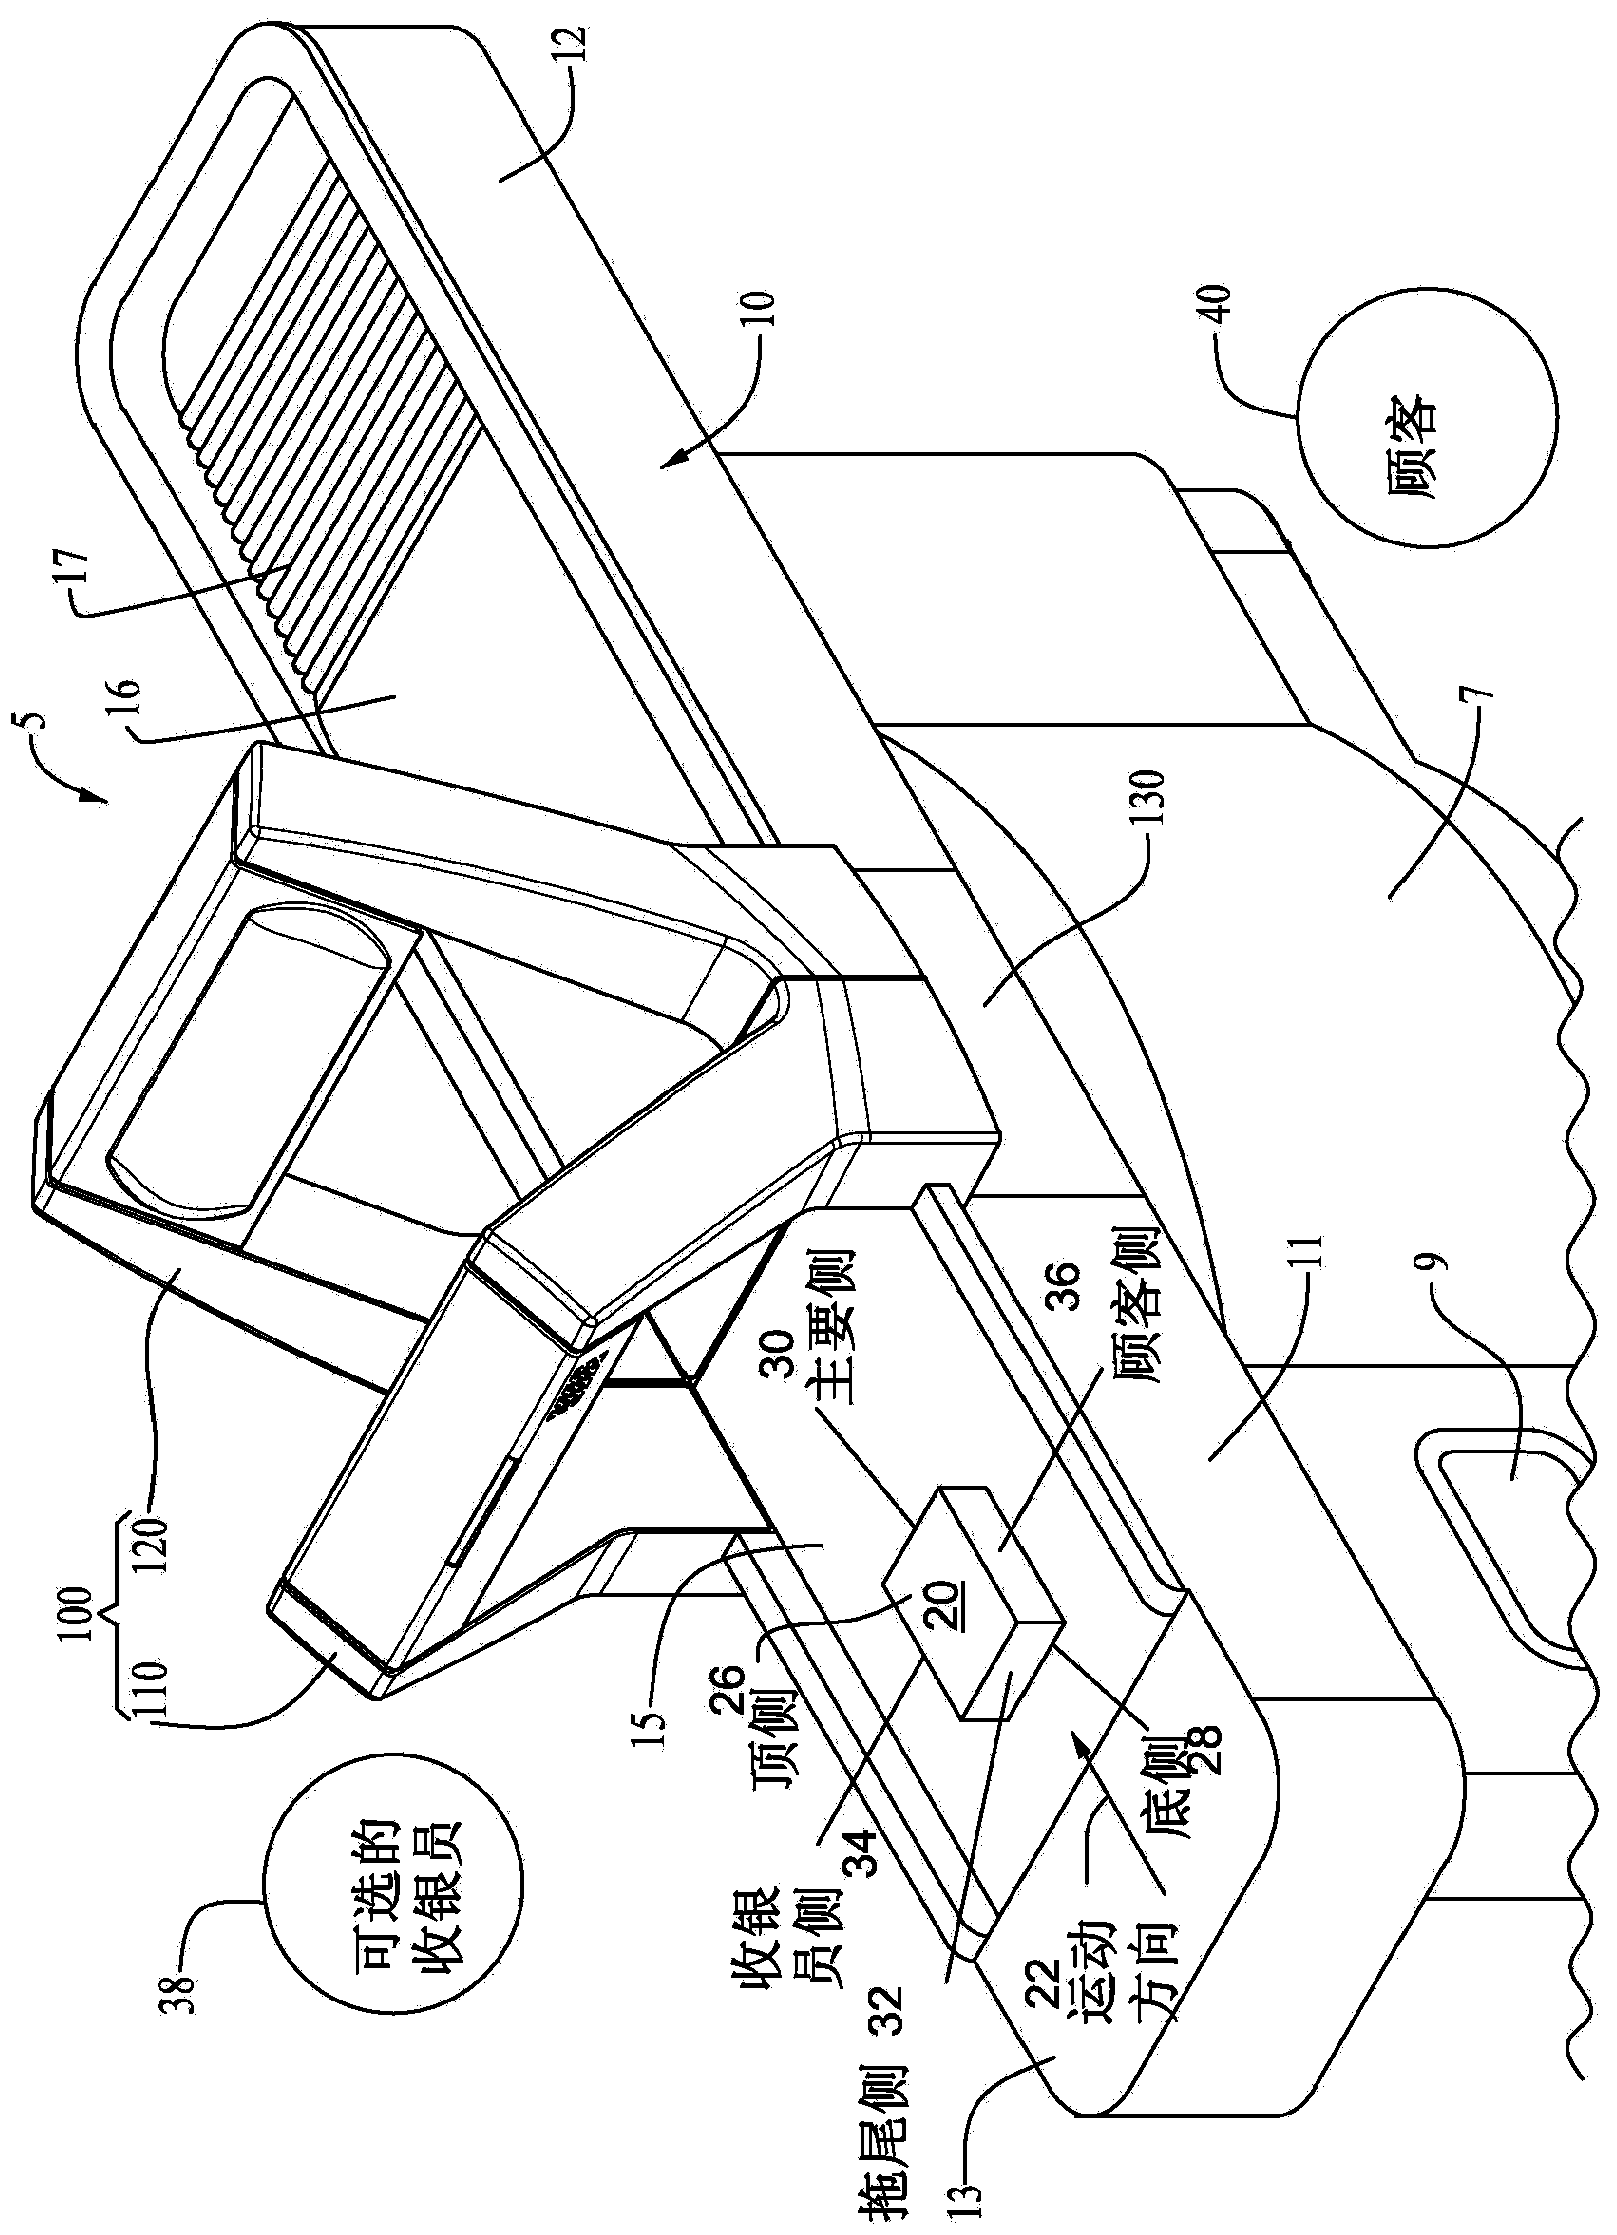 Tunnel or portal scanner and method of scanning for automated checkout